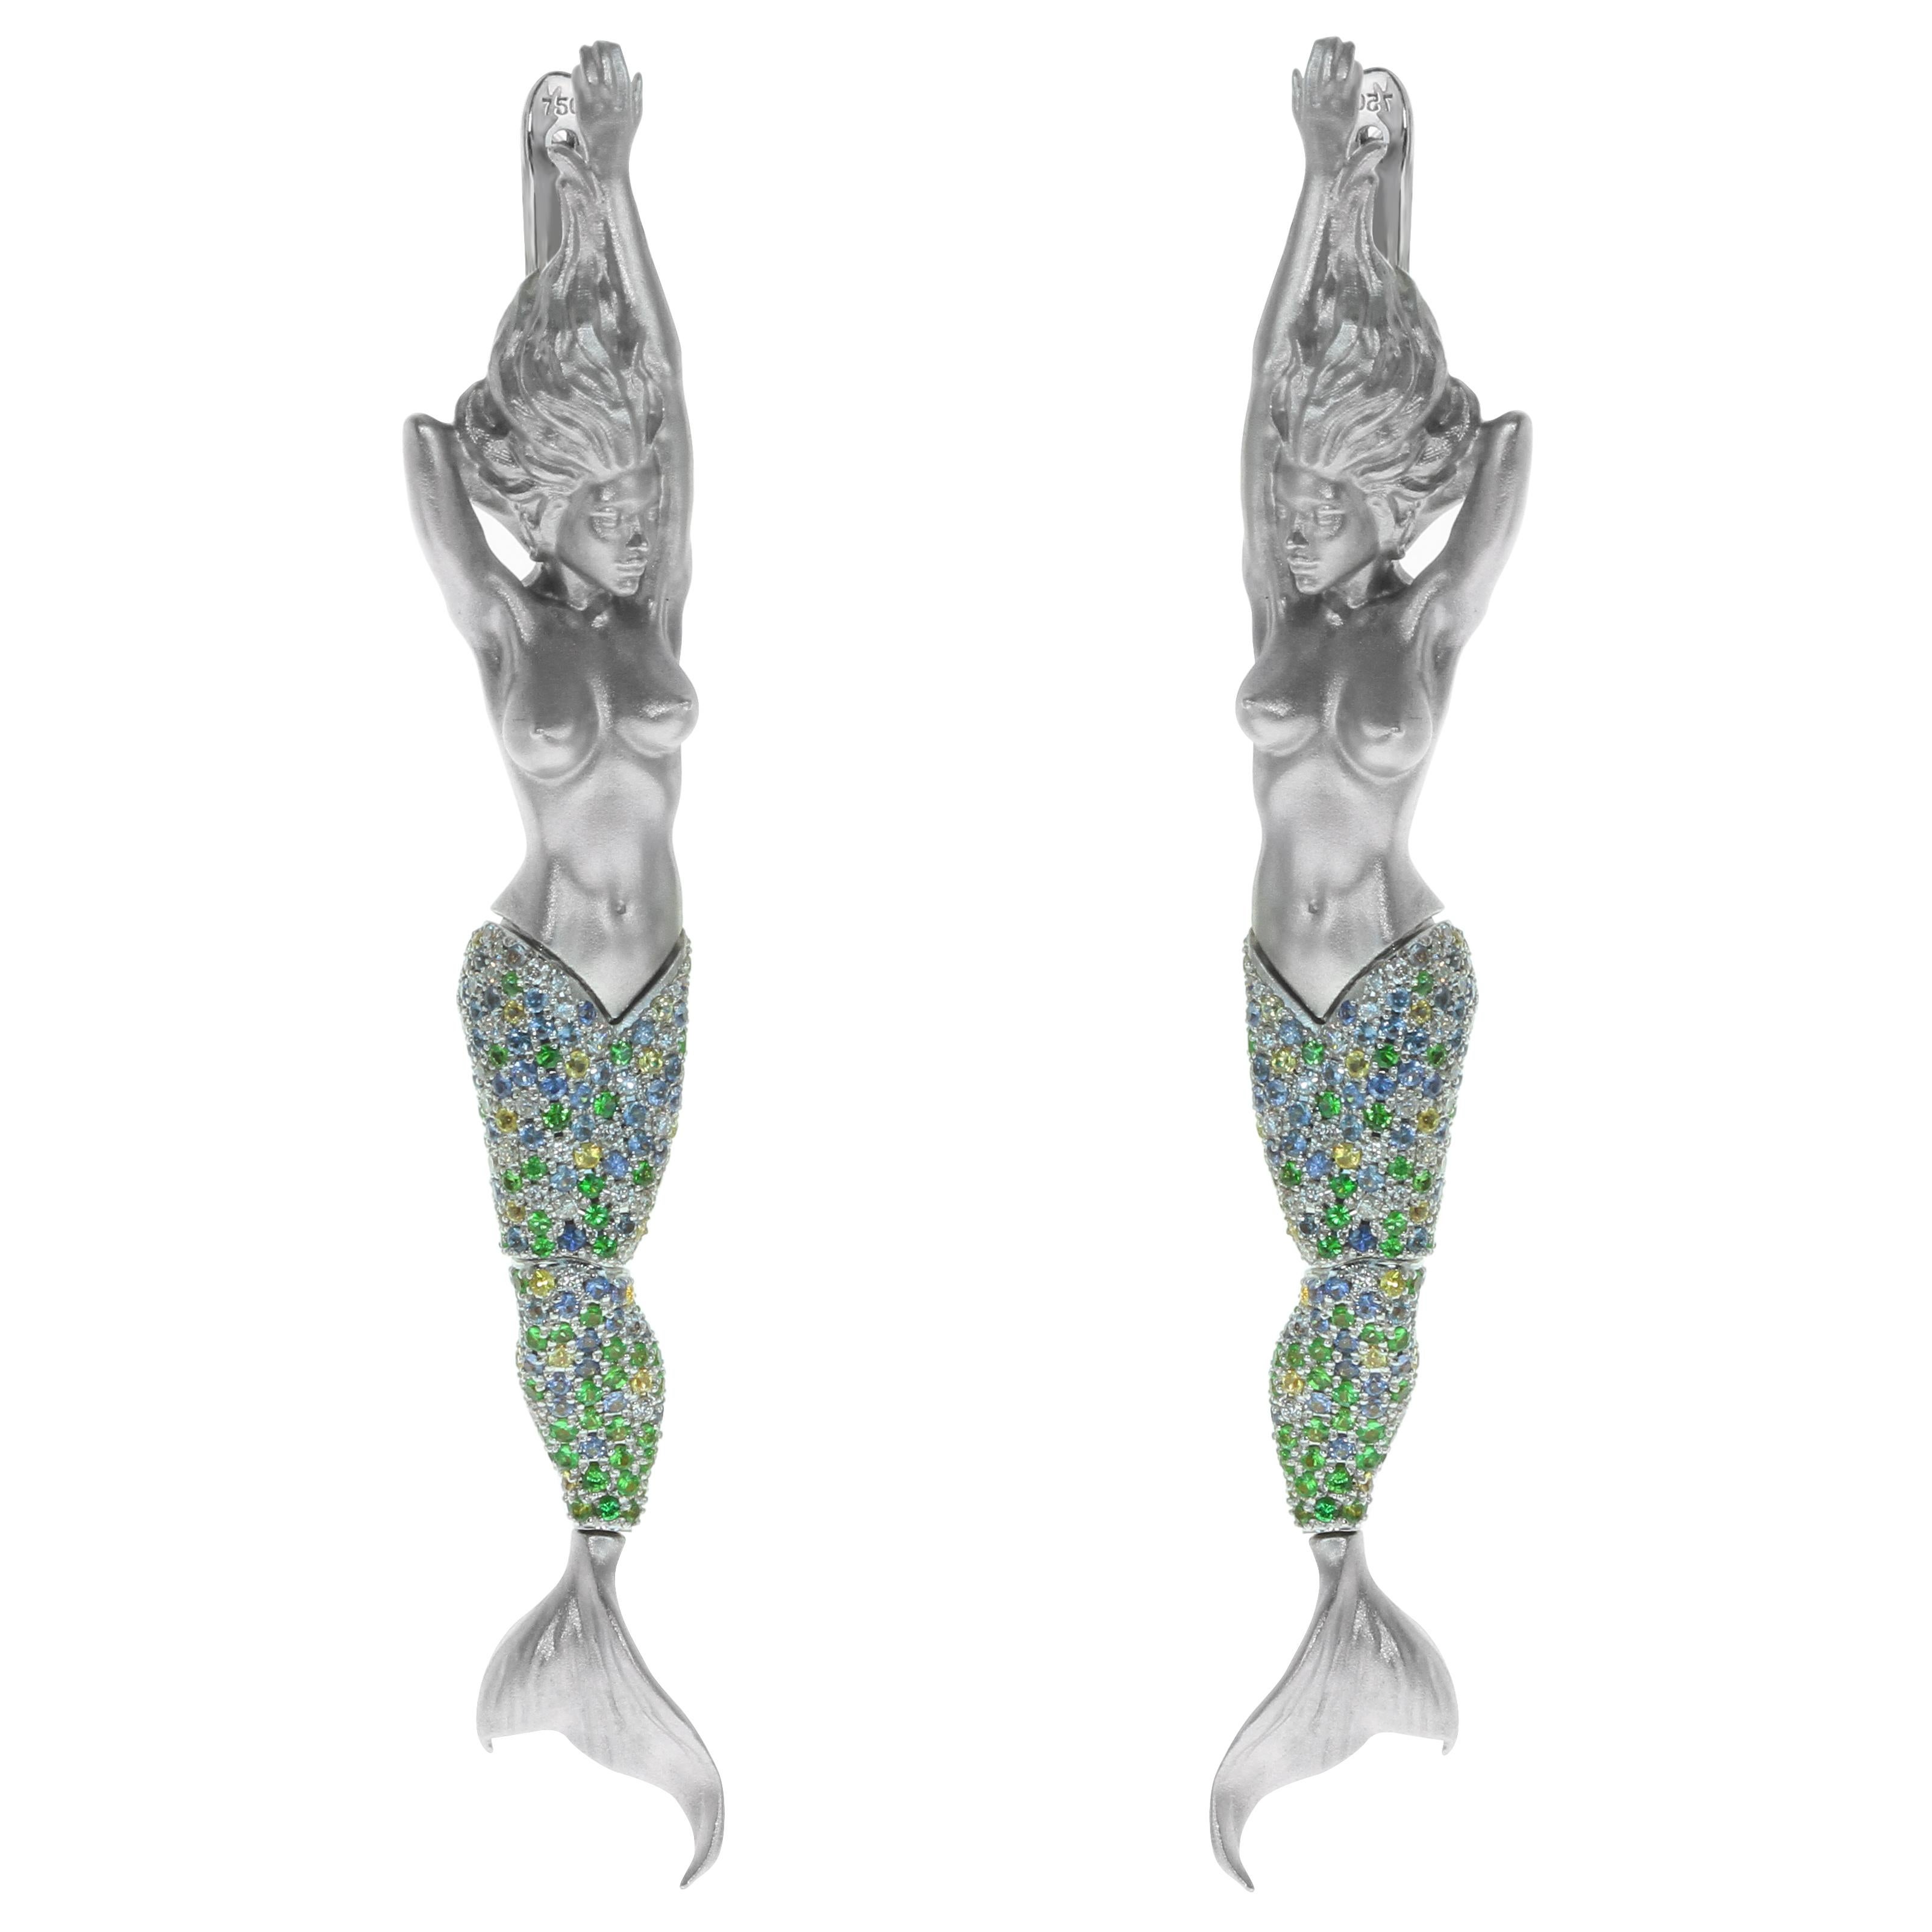 Diamond Sapphire 18 Karat White Gold Mermaid Suite
Are You hear the Mermaids song from unhabited island?  They sing only for You. 
Feel the Mermaid sensuality once You fit this fairytale suite. All eyes will be on you only. The fairytale can be